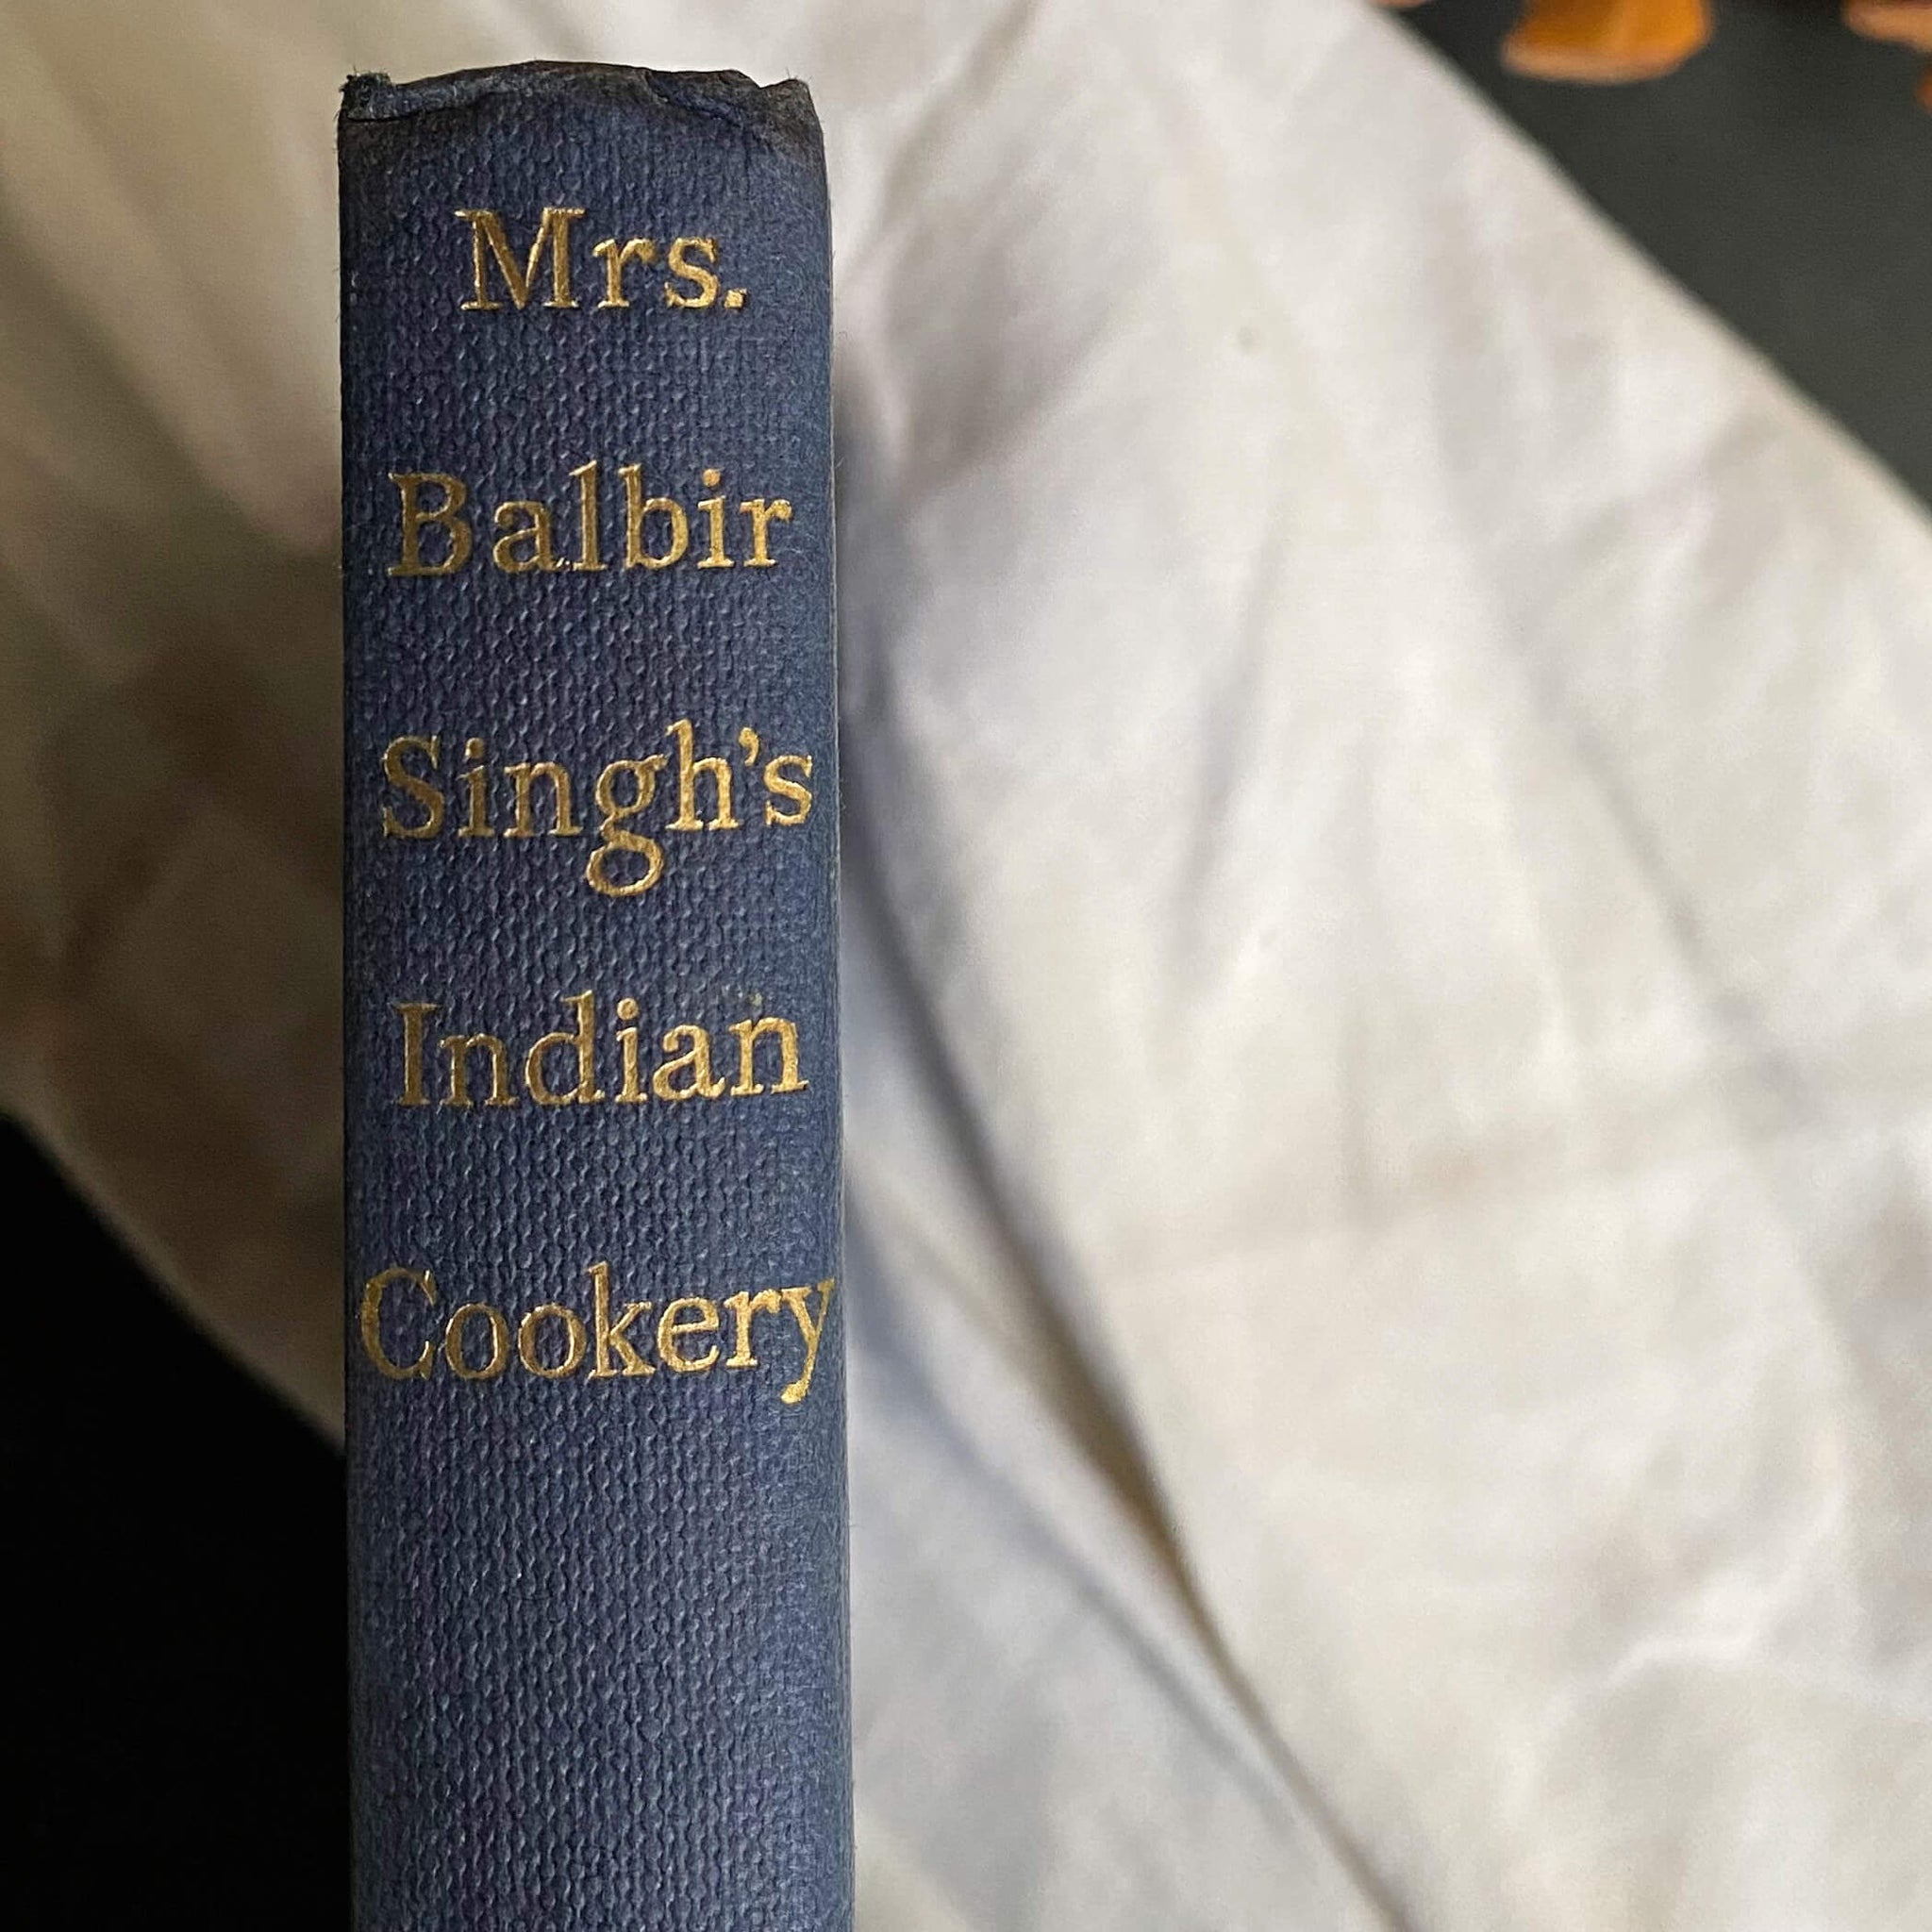 Mrs. Balbir Singh's Indian Cookery - 1965 Edition Second Printing